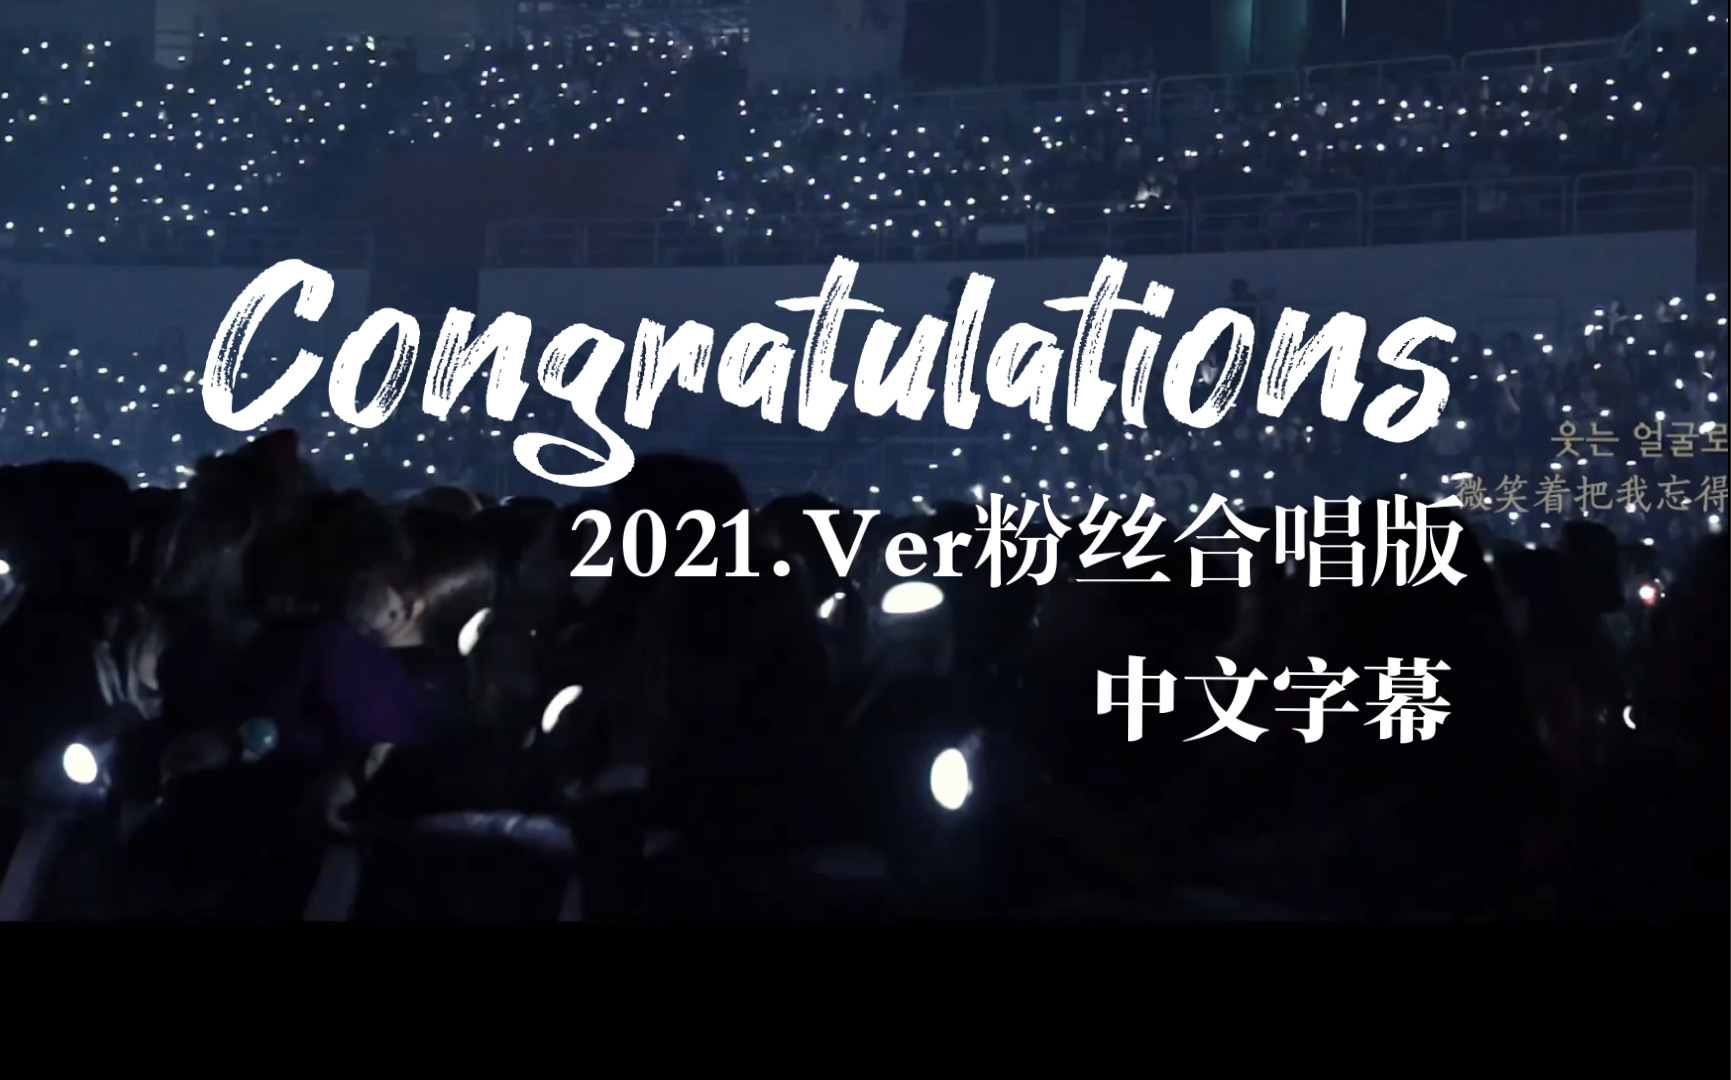 【DAY6】【中字】Congratulations 2021 ver (Vocals by My Day)